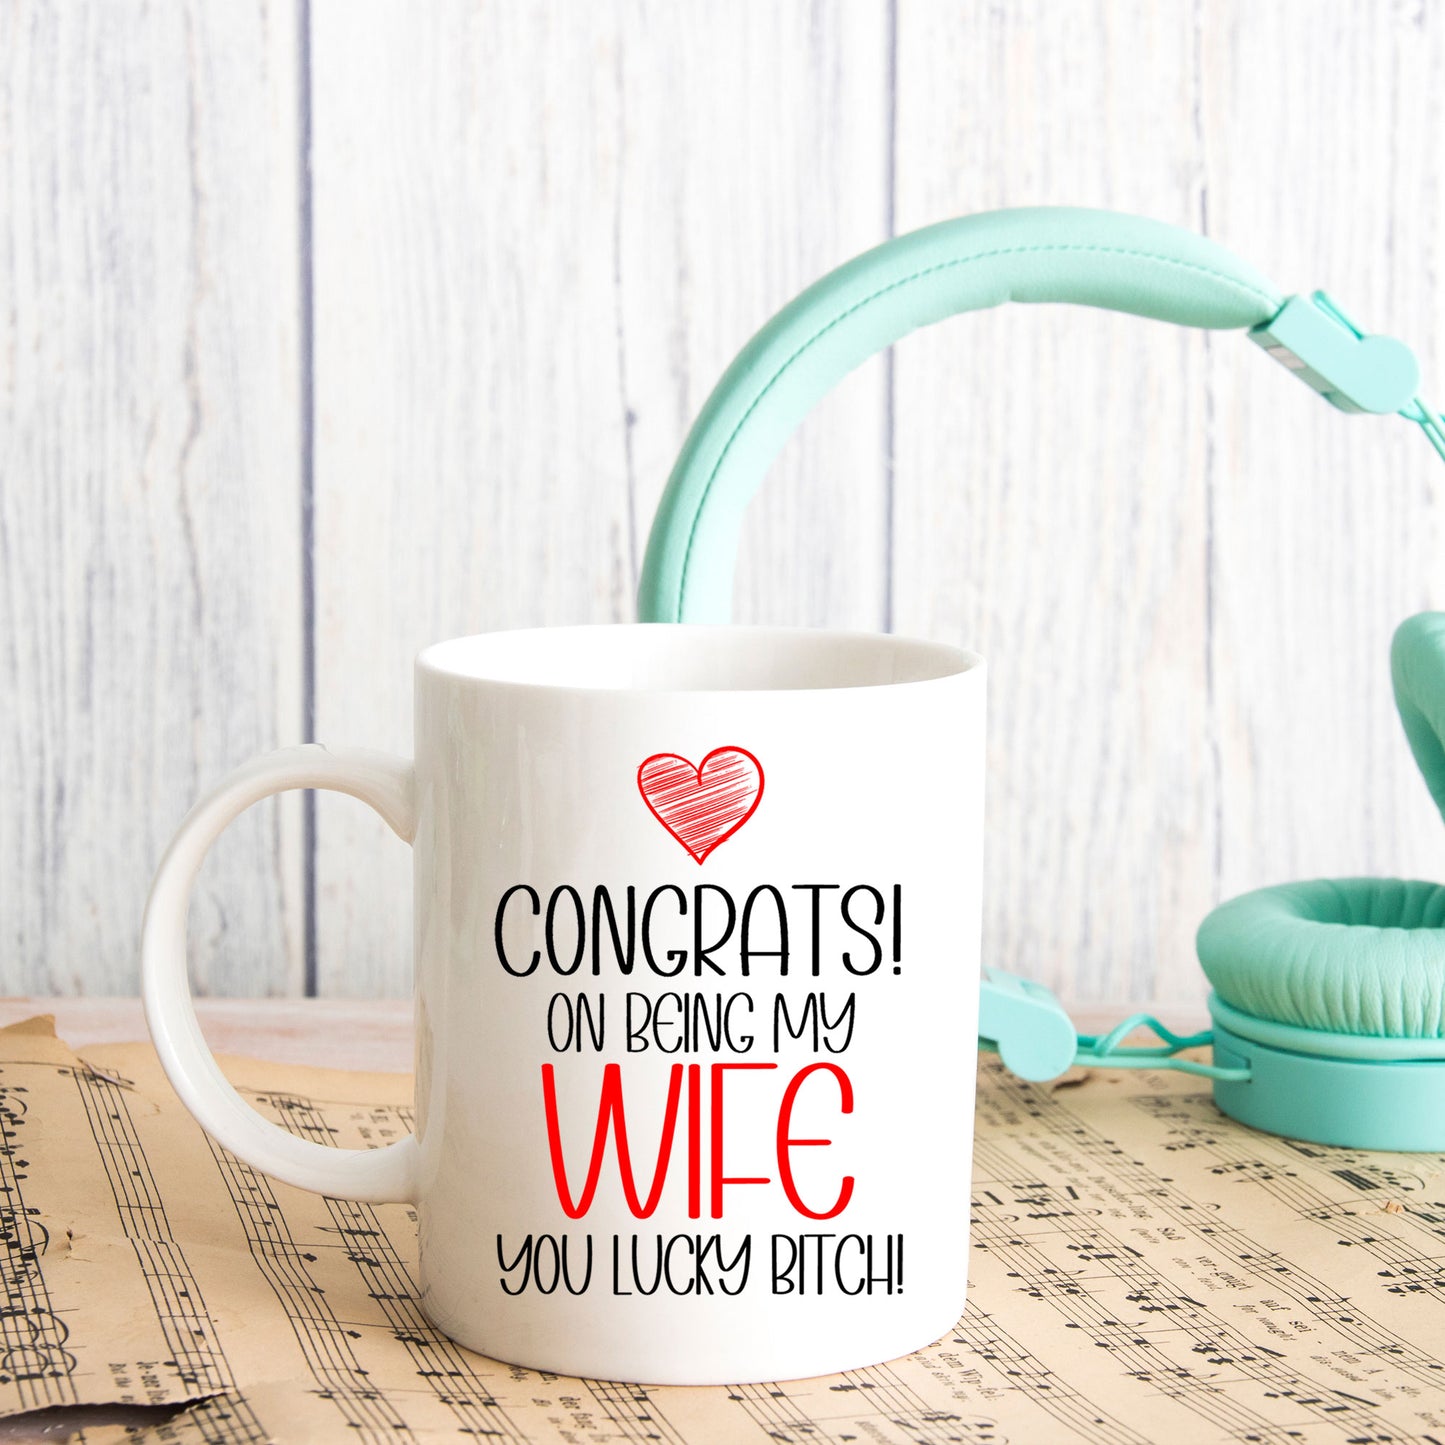 Congrats On Being My Wife Mug and/or Coaster Gift  - Always Looking Good - Lucky Bitch Coaster On Its Own  